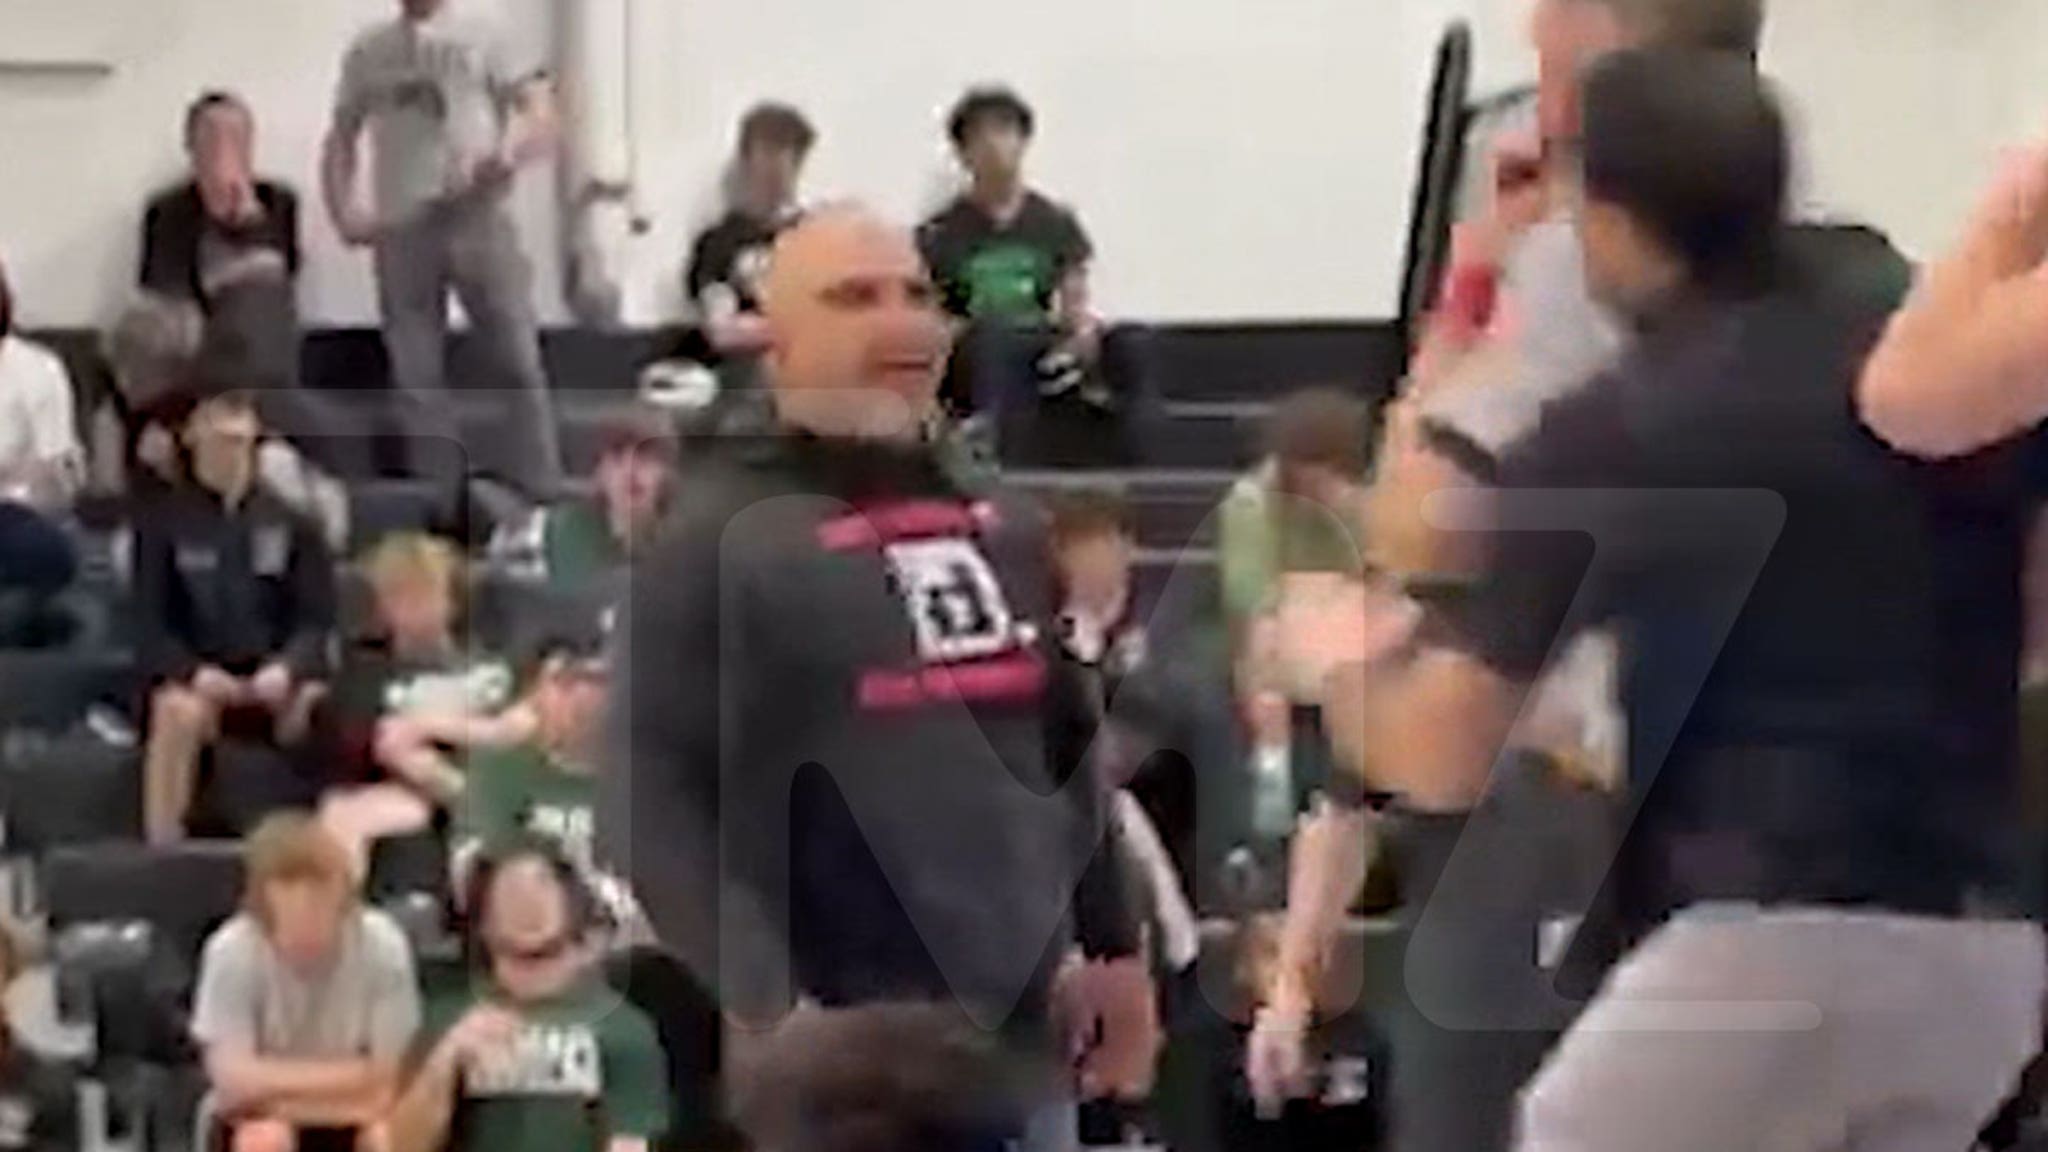 Joe Gorga Gets Into Heated Dispute with Son’s Wrestling Referee and Is Ultimately Removed